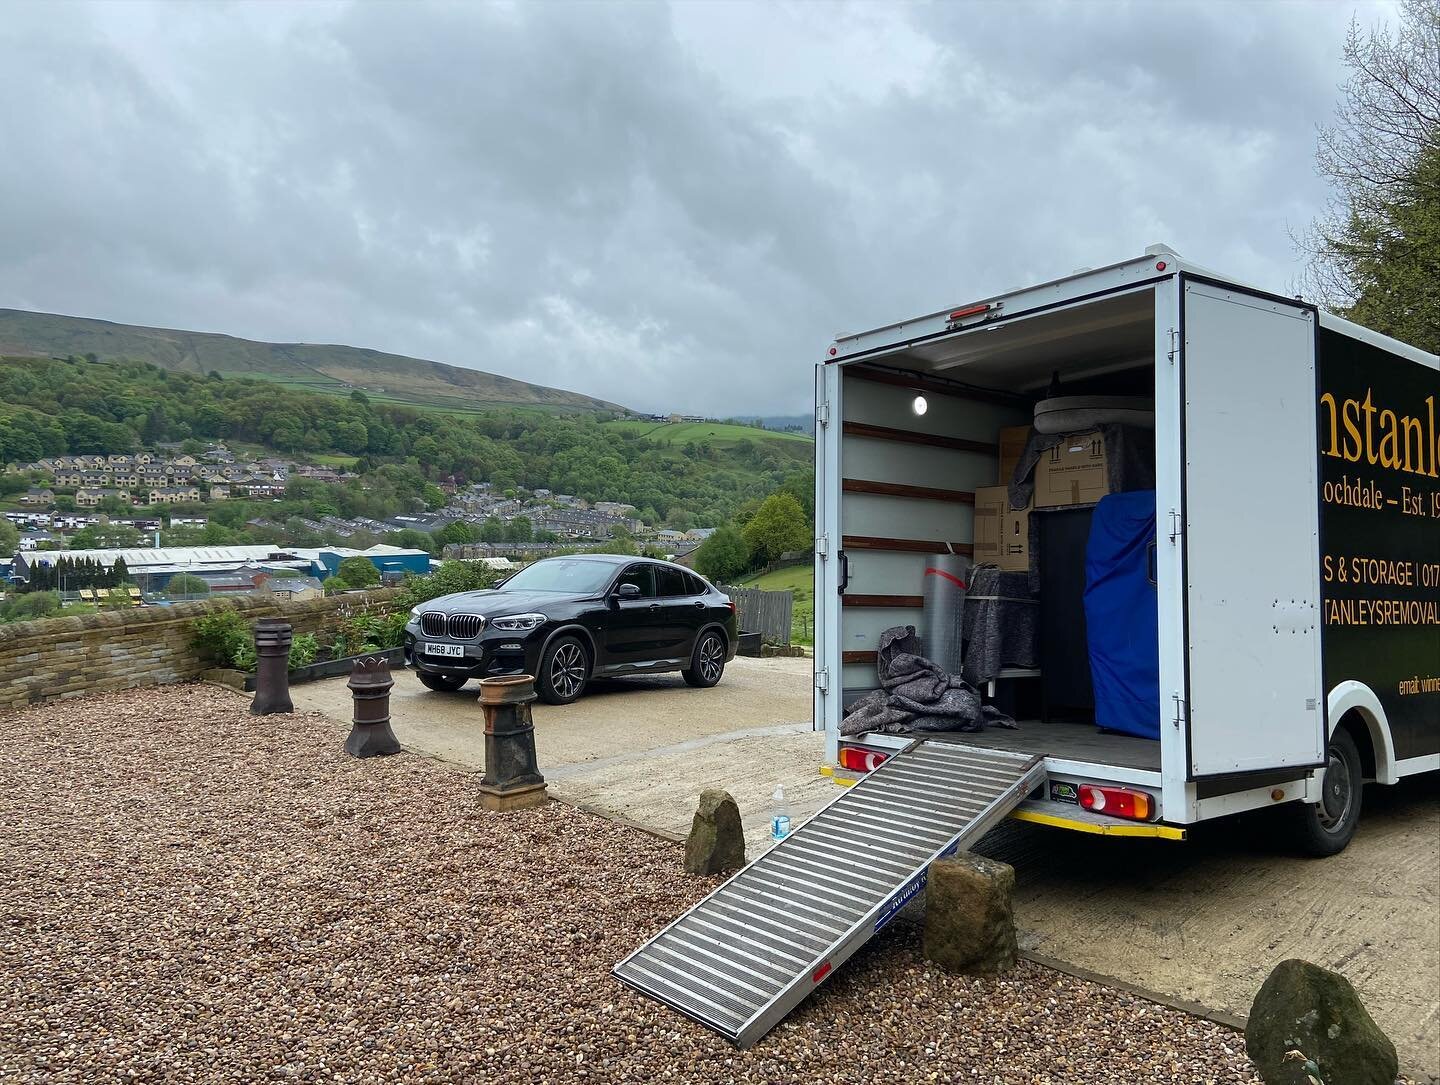 Little Van 🚐 Day!

#winstanleysremovals #removalservice #removalsandstorage #movingday #newhome #home #localbusiness #todmorden #cloudyday #cloudy